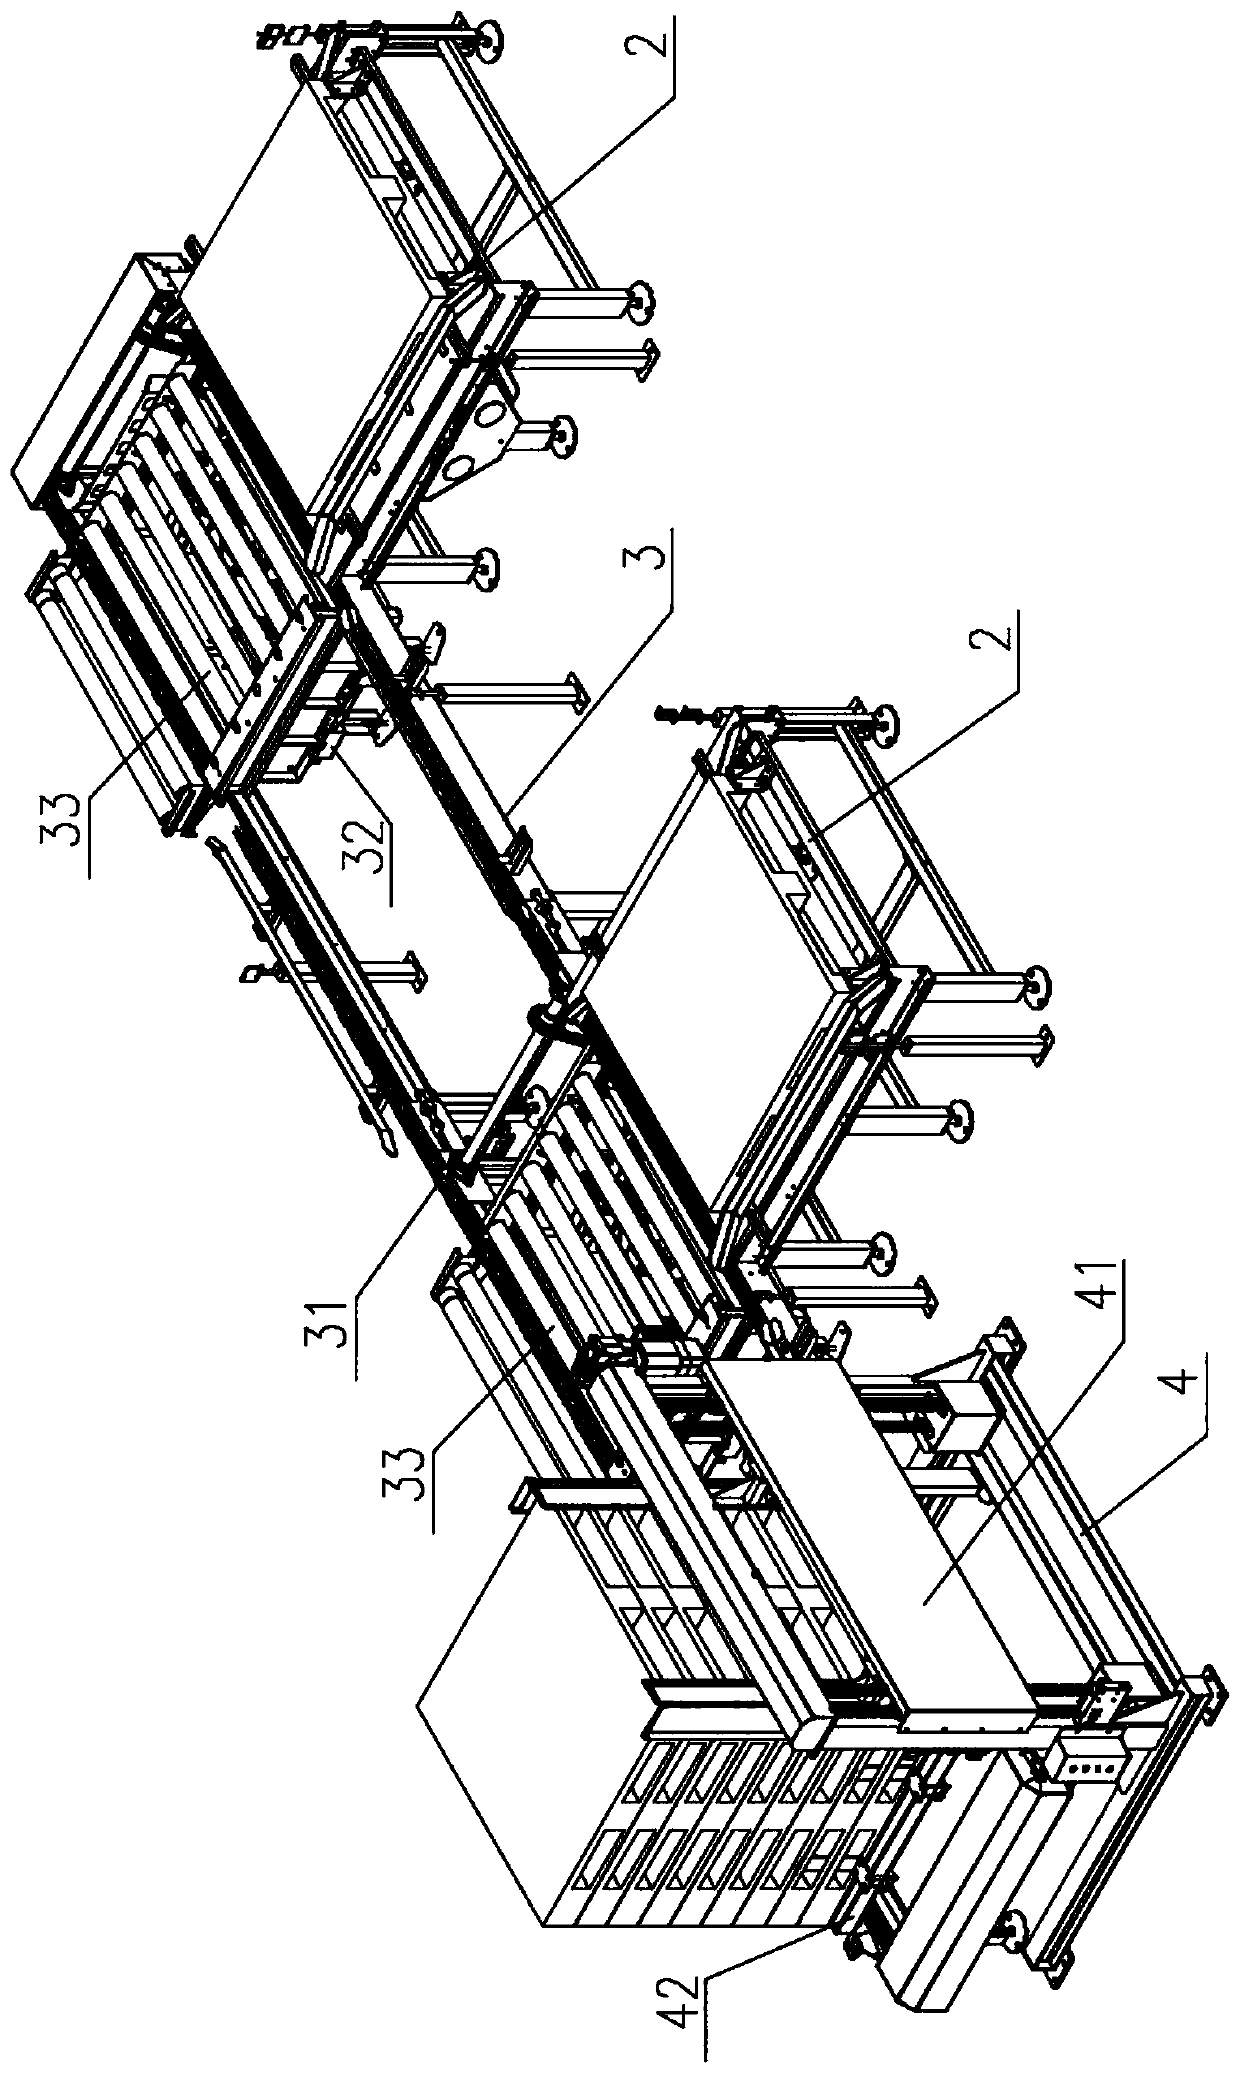 Automatic stacking system with tray jacking and transferring conveyor